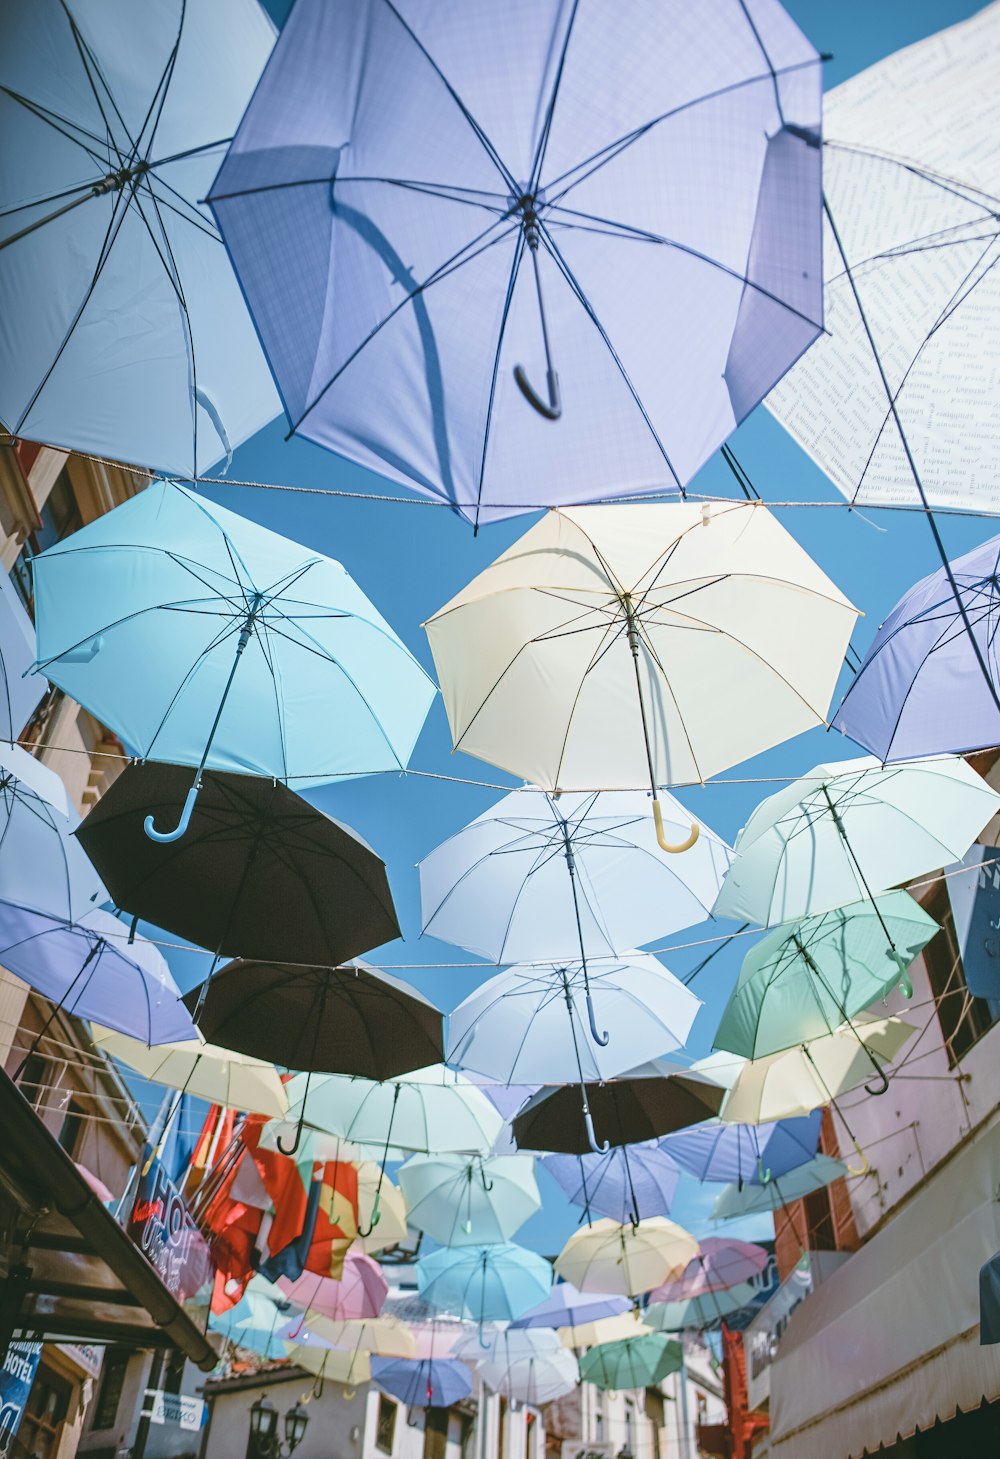 assorted-color umbrellas hanged on wires under blue sky during daytime